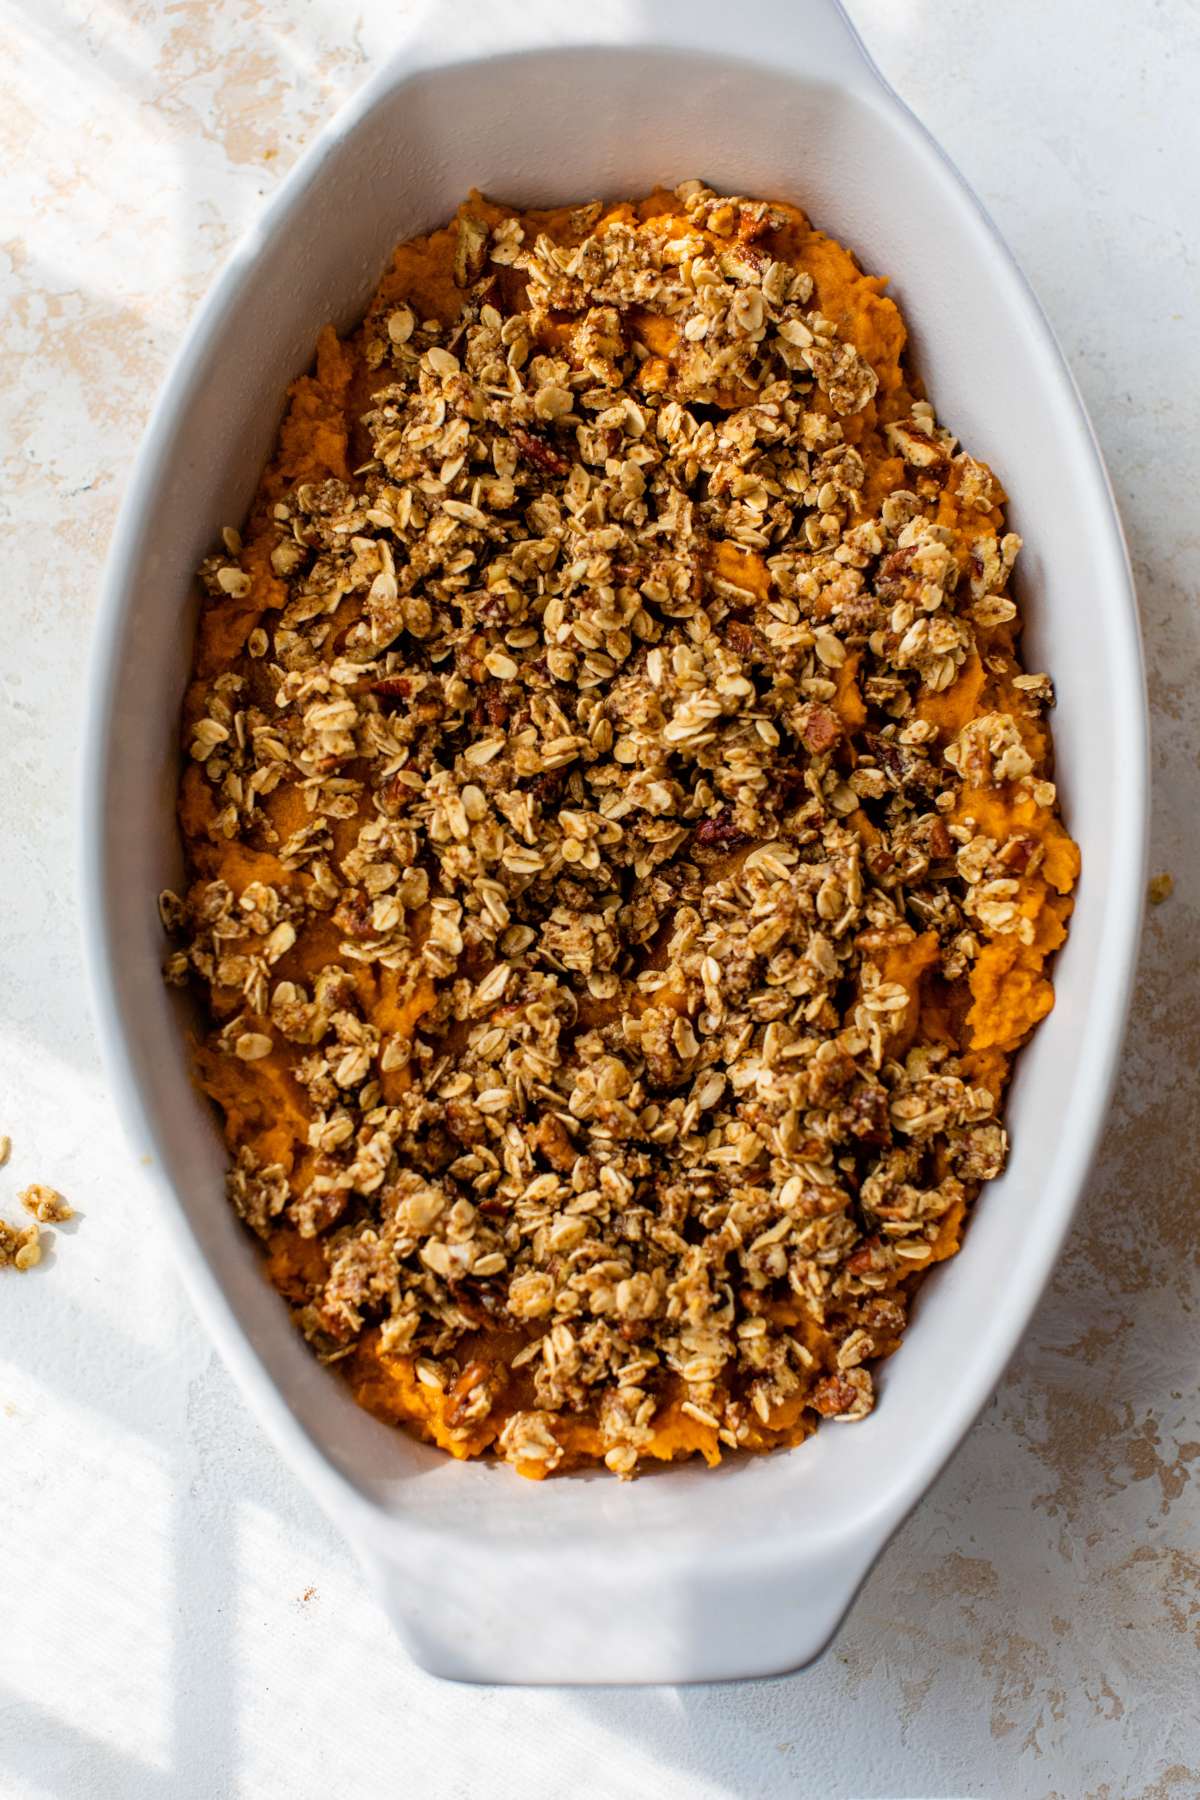 Baked sweet potato casserole with pecan oat topping.